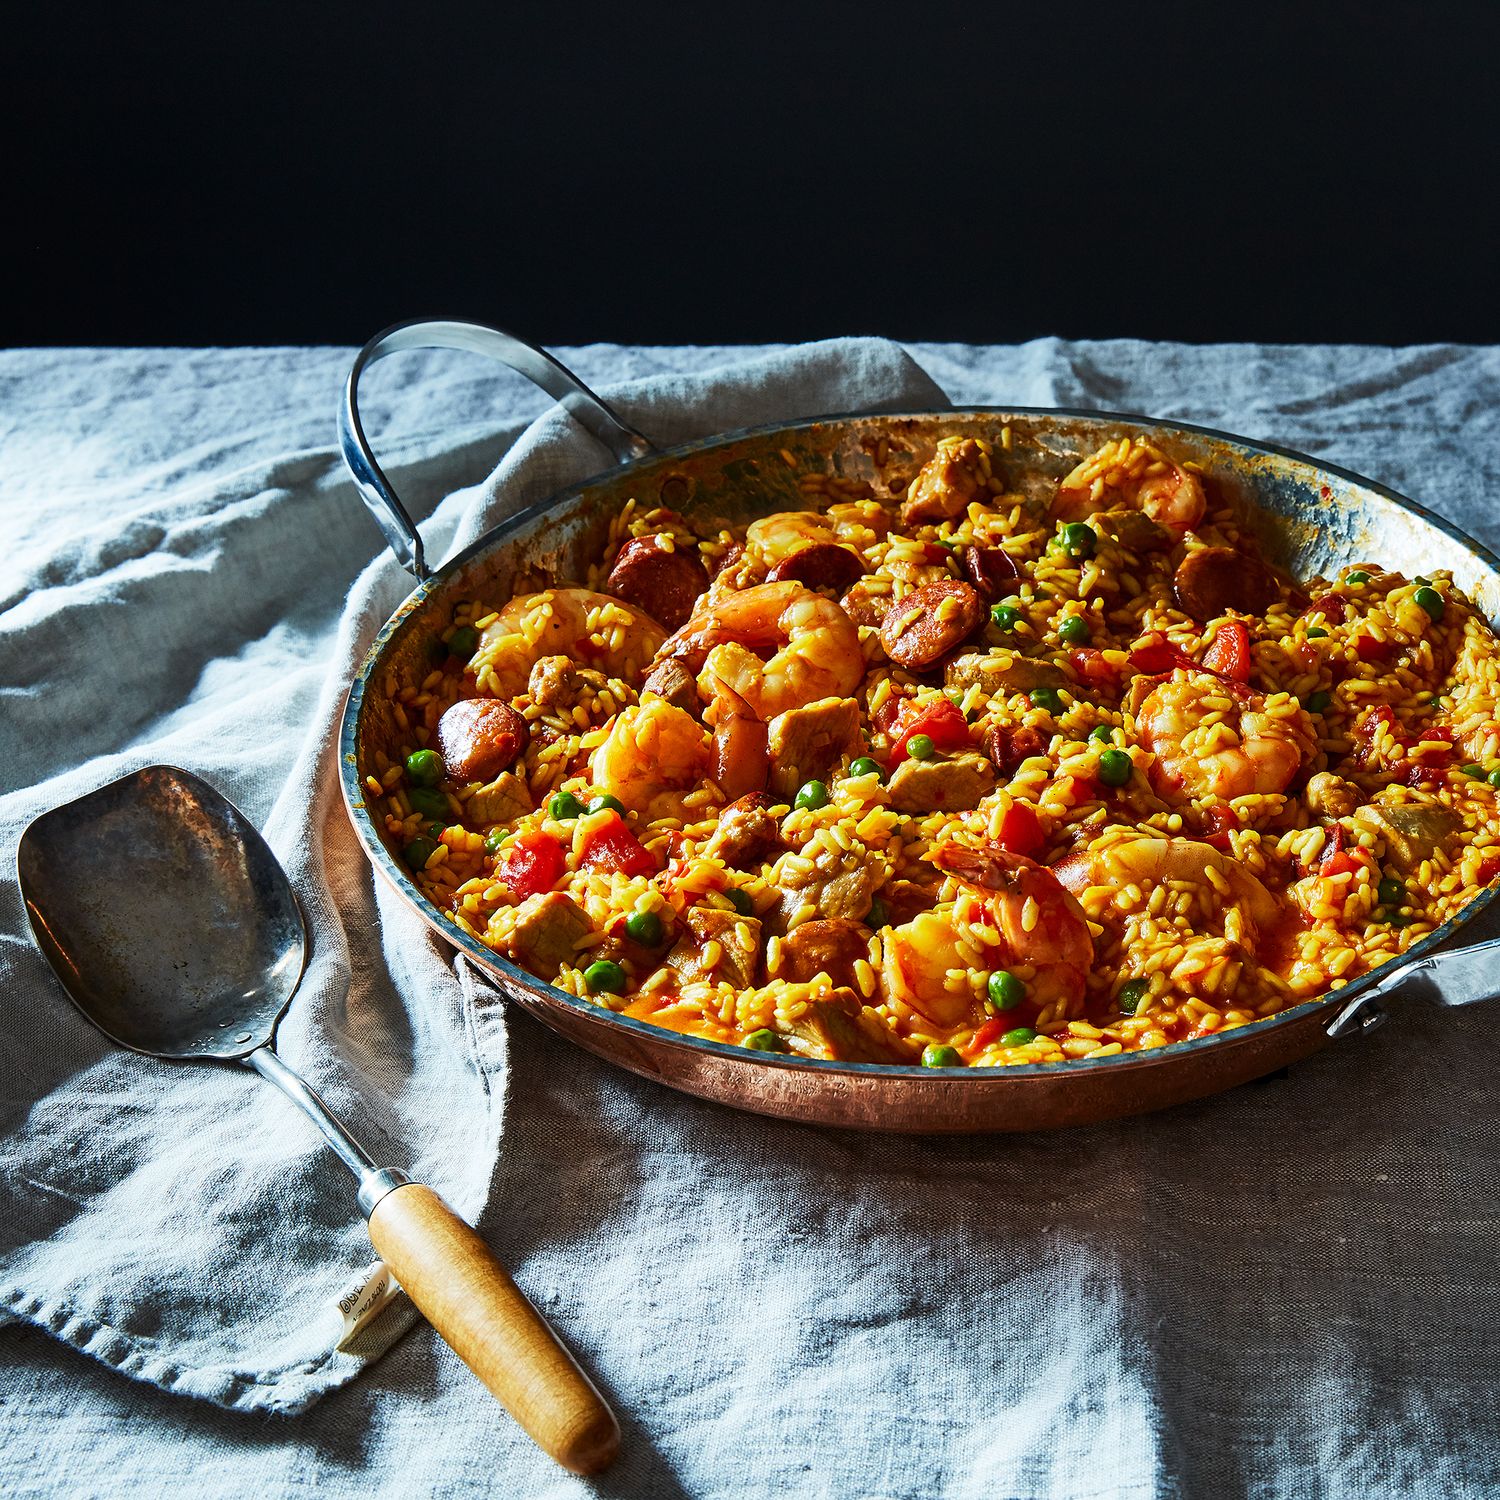 Hammered Copper Paella Pan on Food52